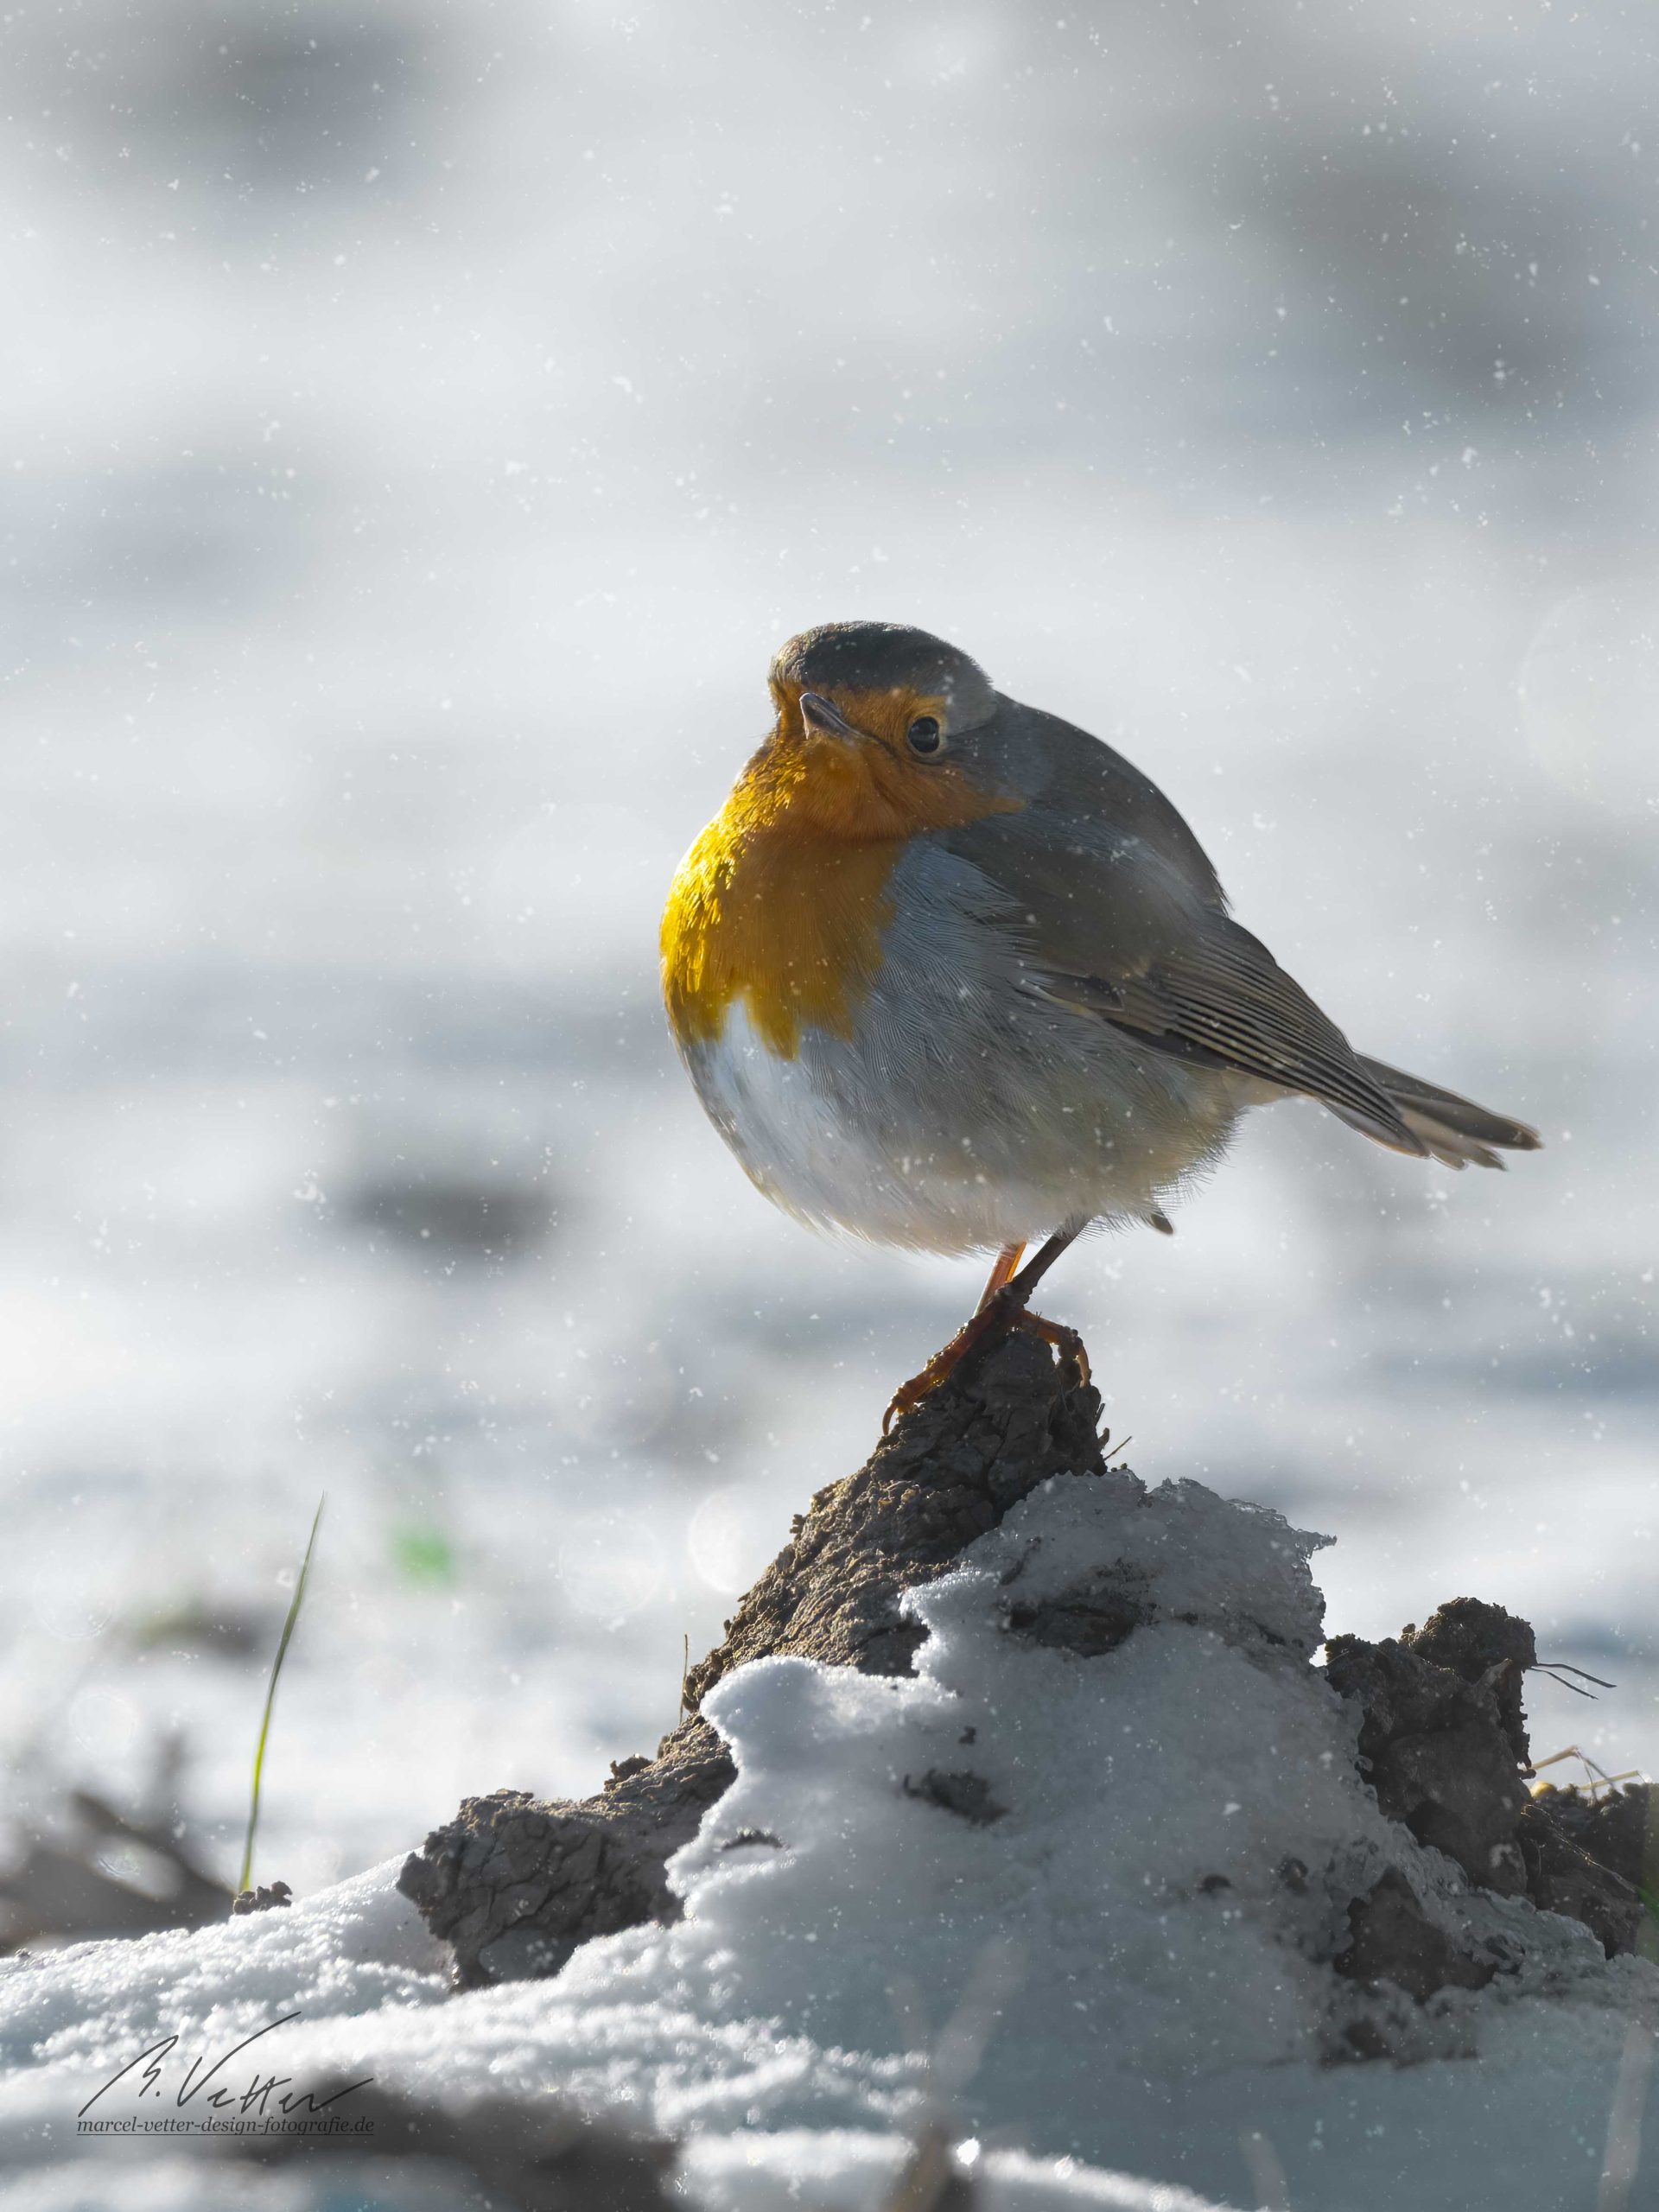 European robin (Erithacus rubecula) playing in the snow